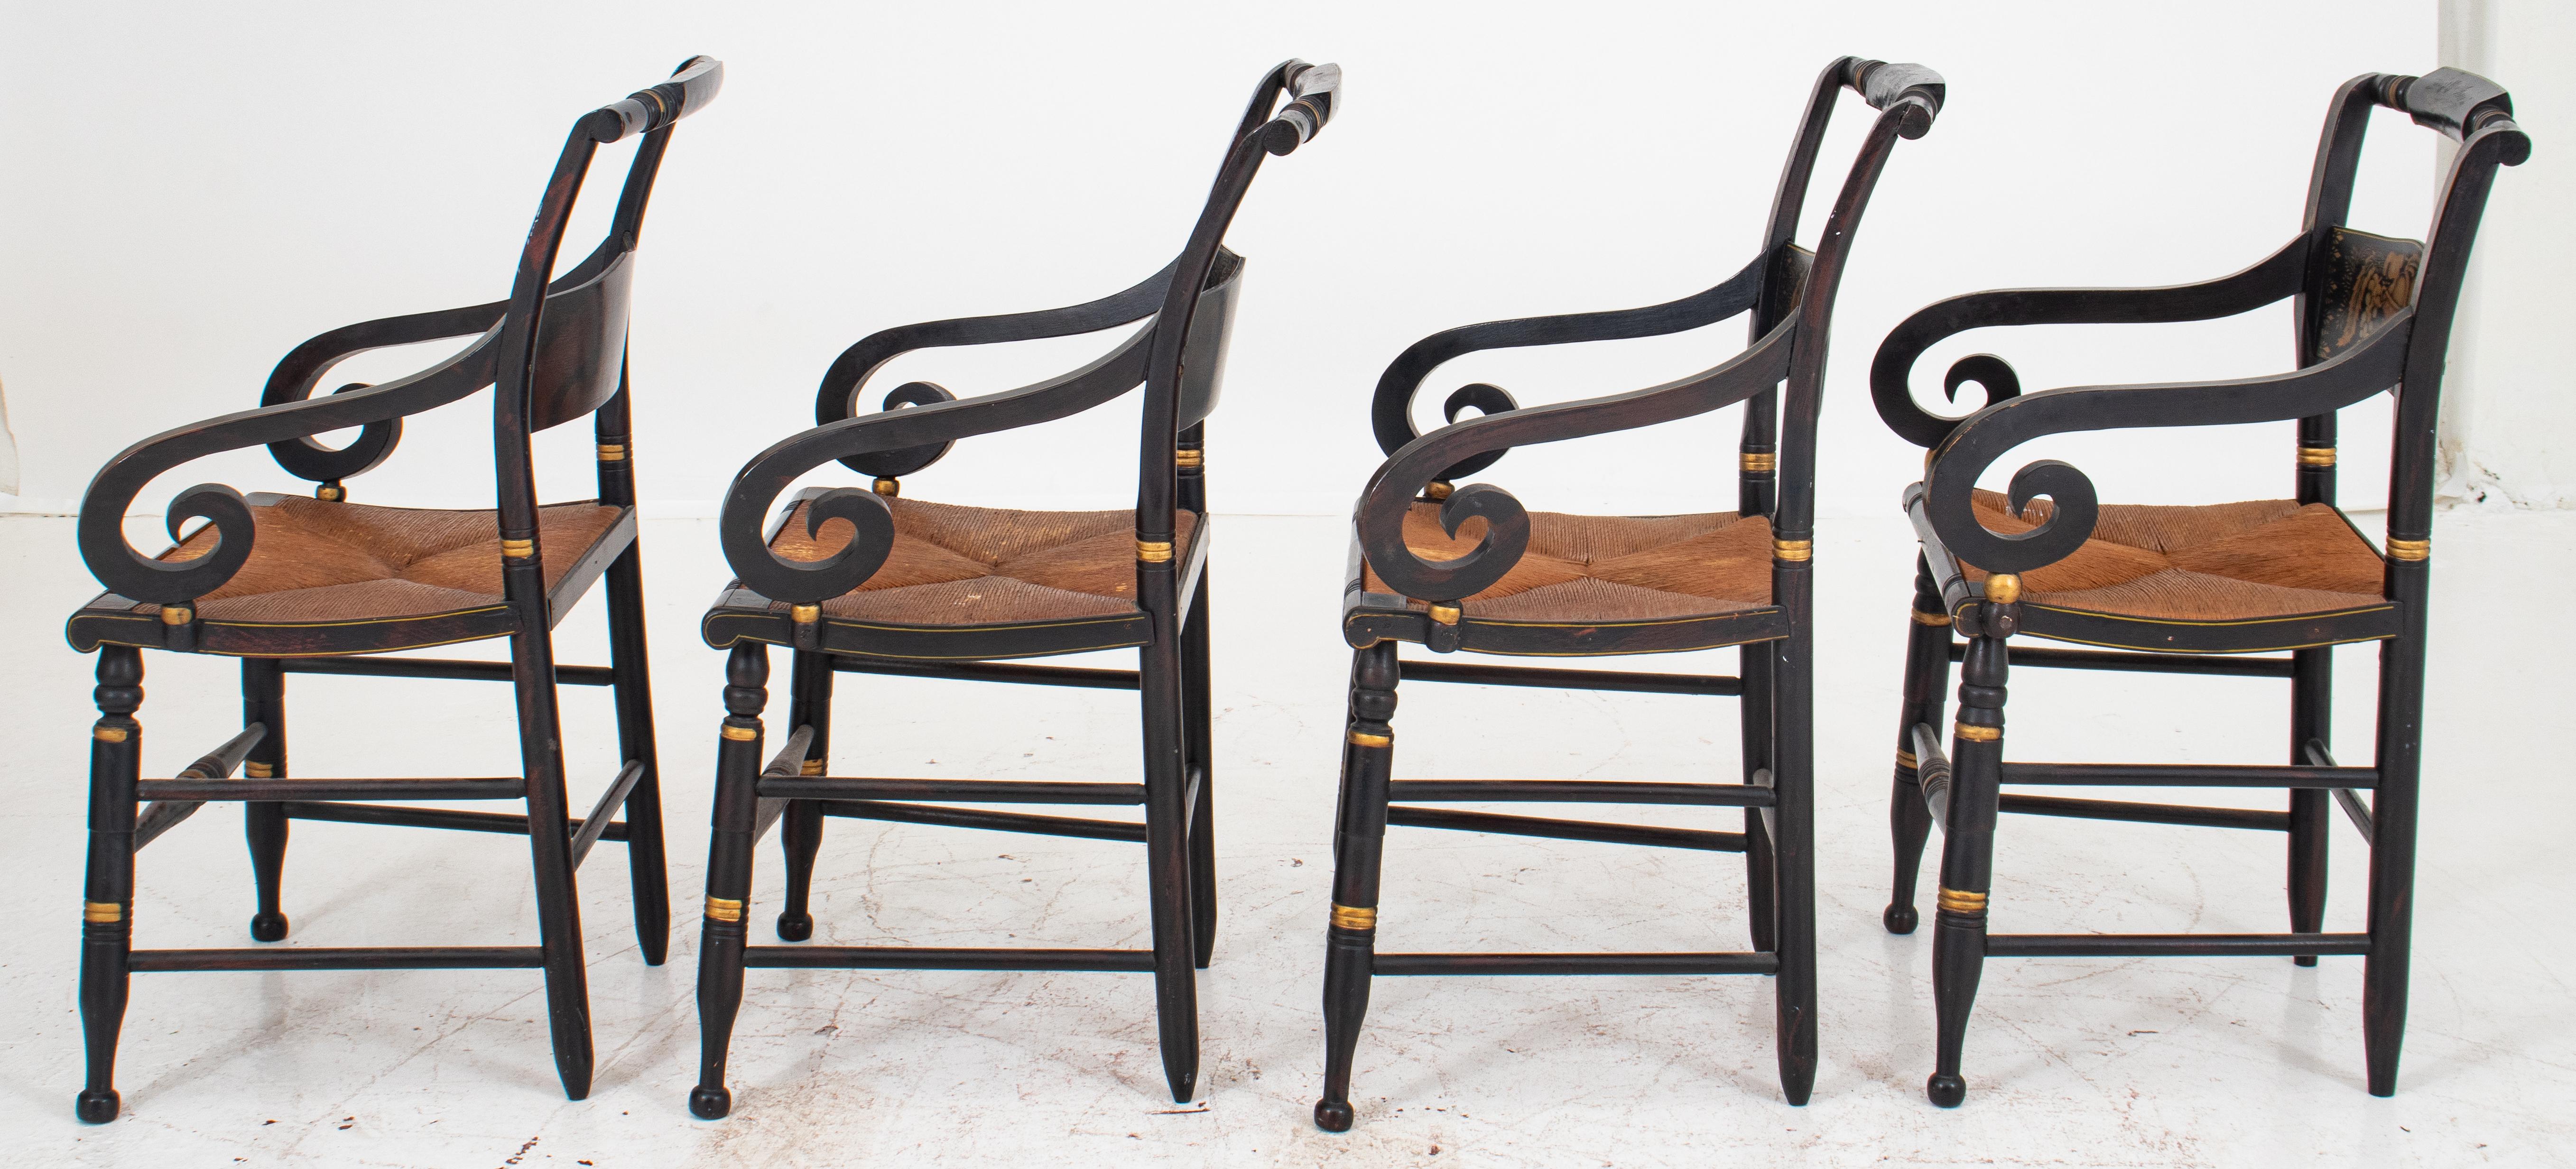 Victorian Hitchcock stenciled, faux-painted, and ebonized armchairs with rush seats, four, each with painted crestrails, scrolling arms and turned legs joined by stretchers. 34